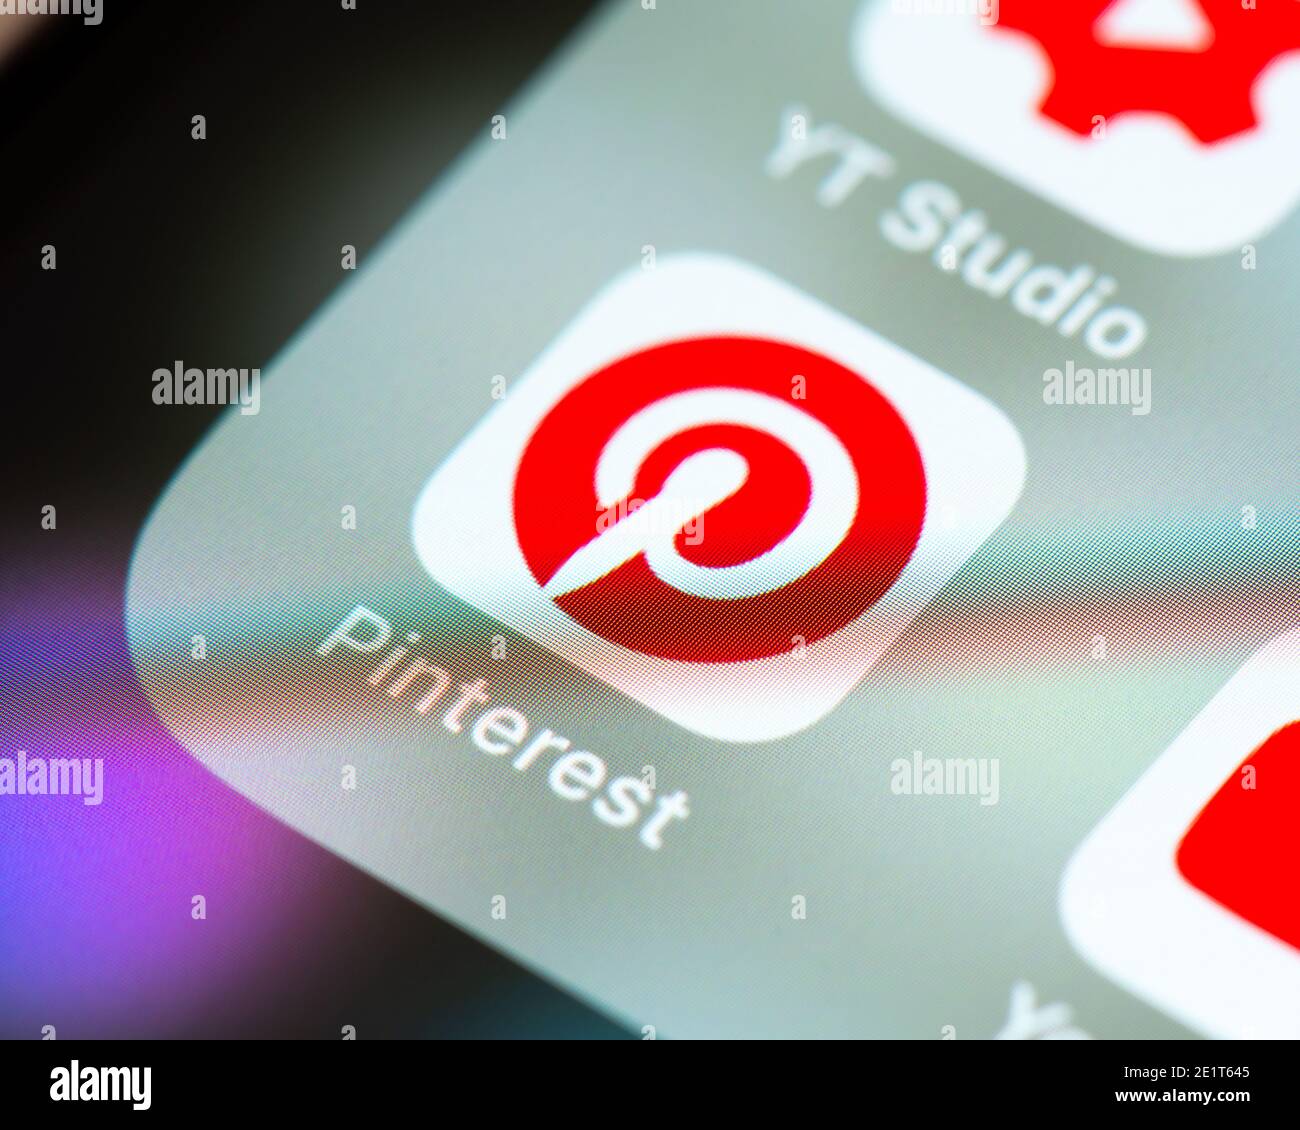 Pinterest app icon on Apple iPhone screen. Pinterest is an American image sharing and social media service. Stock Photo